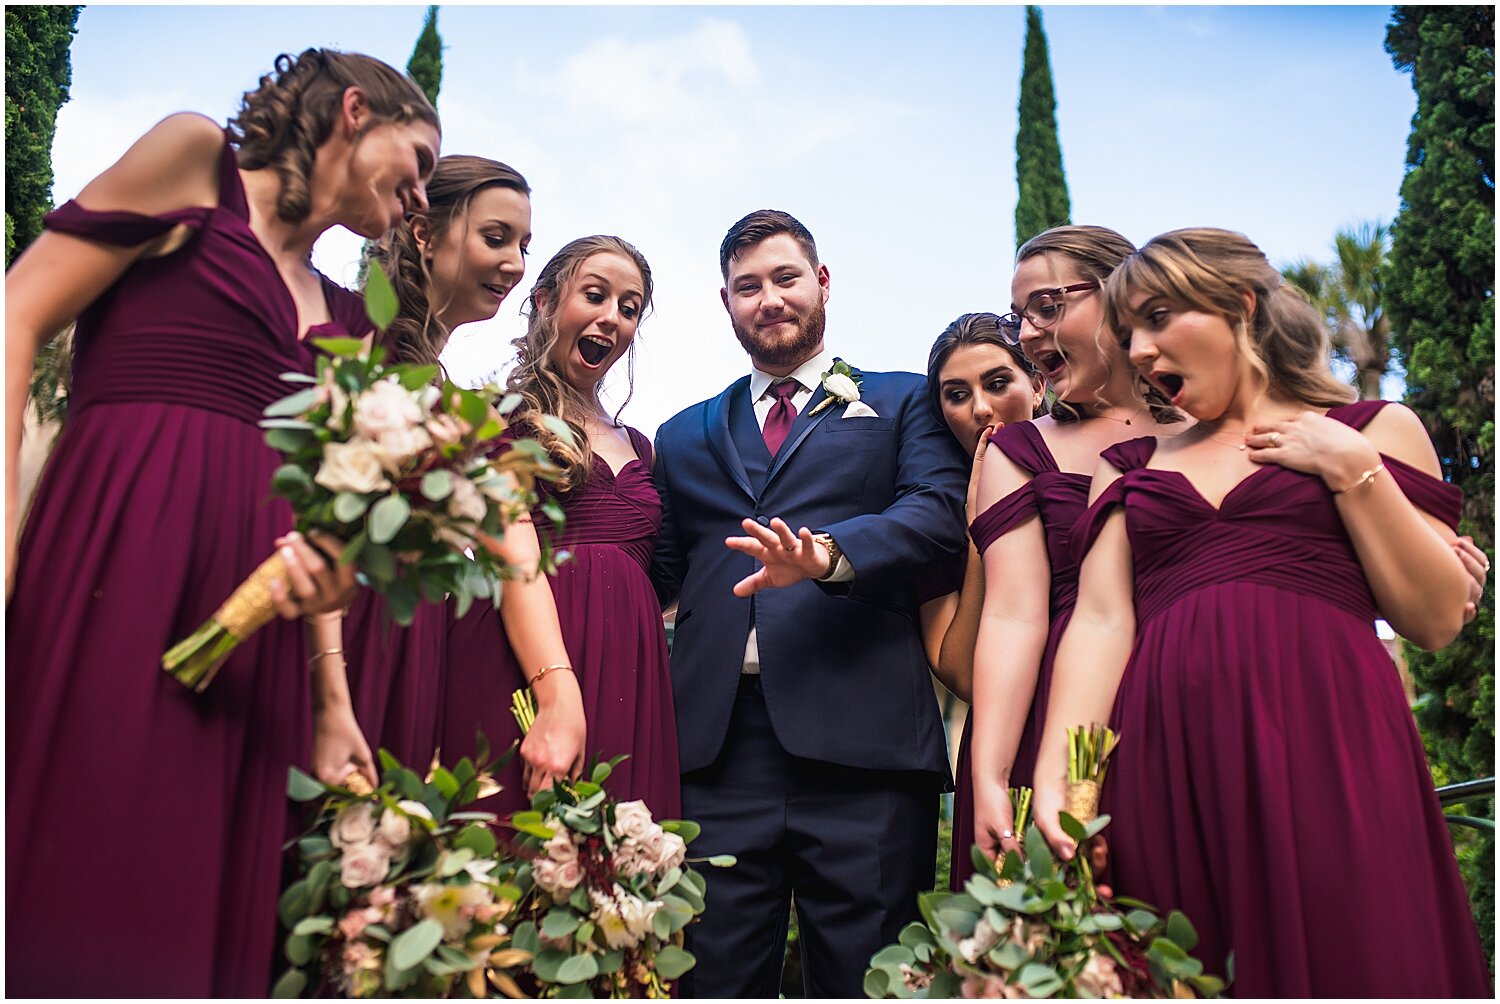  silly bridesmaids and groom photo 